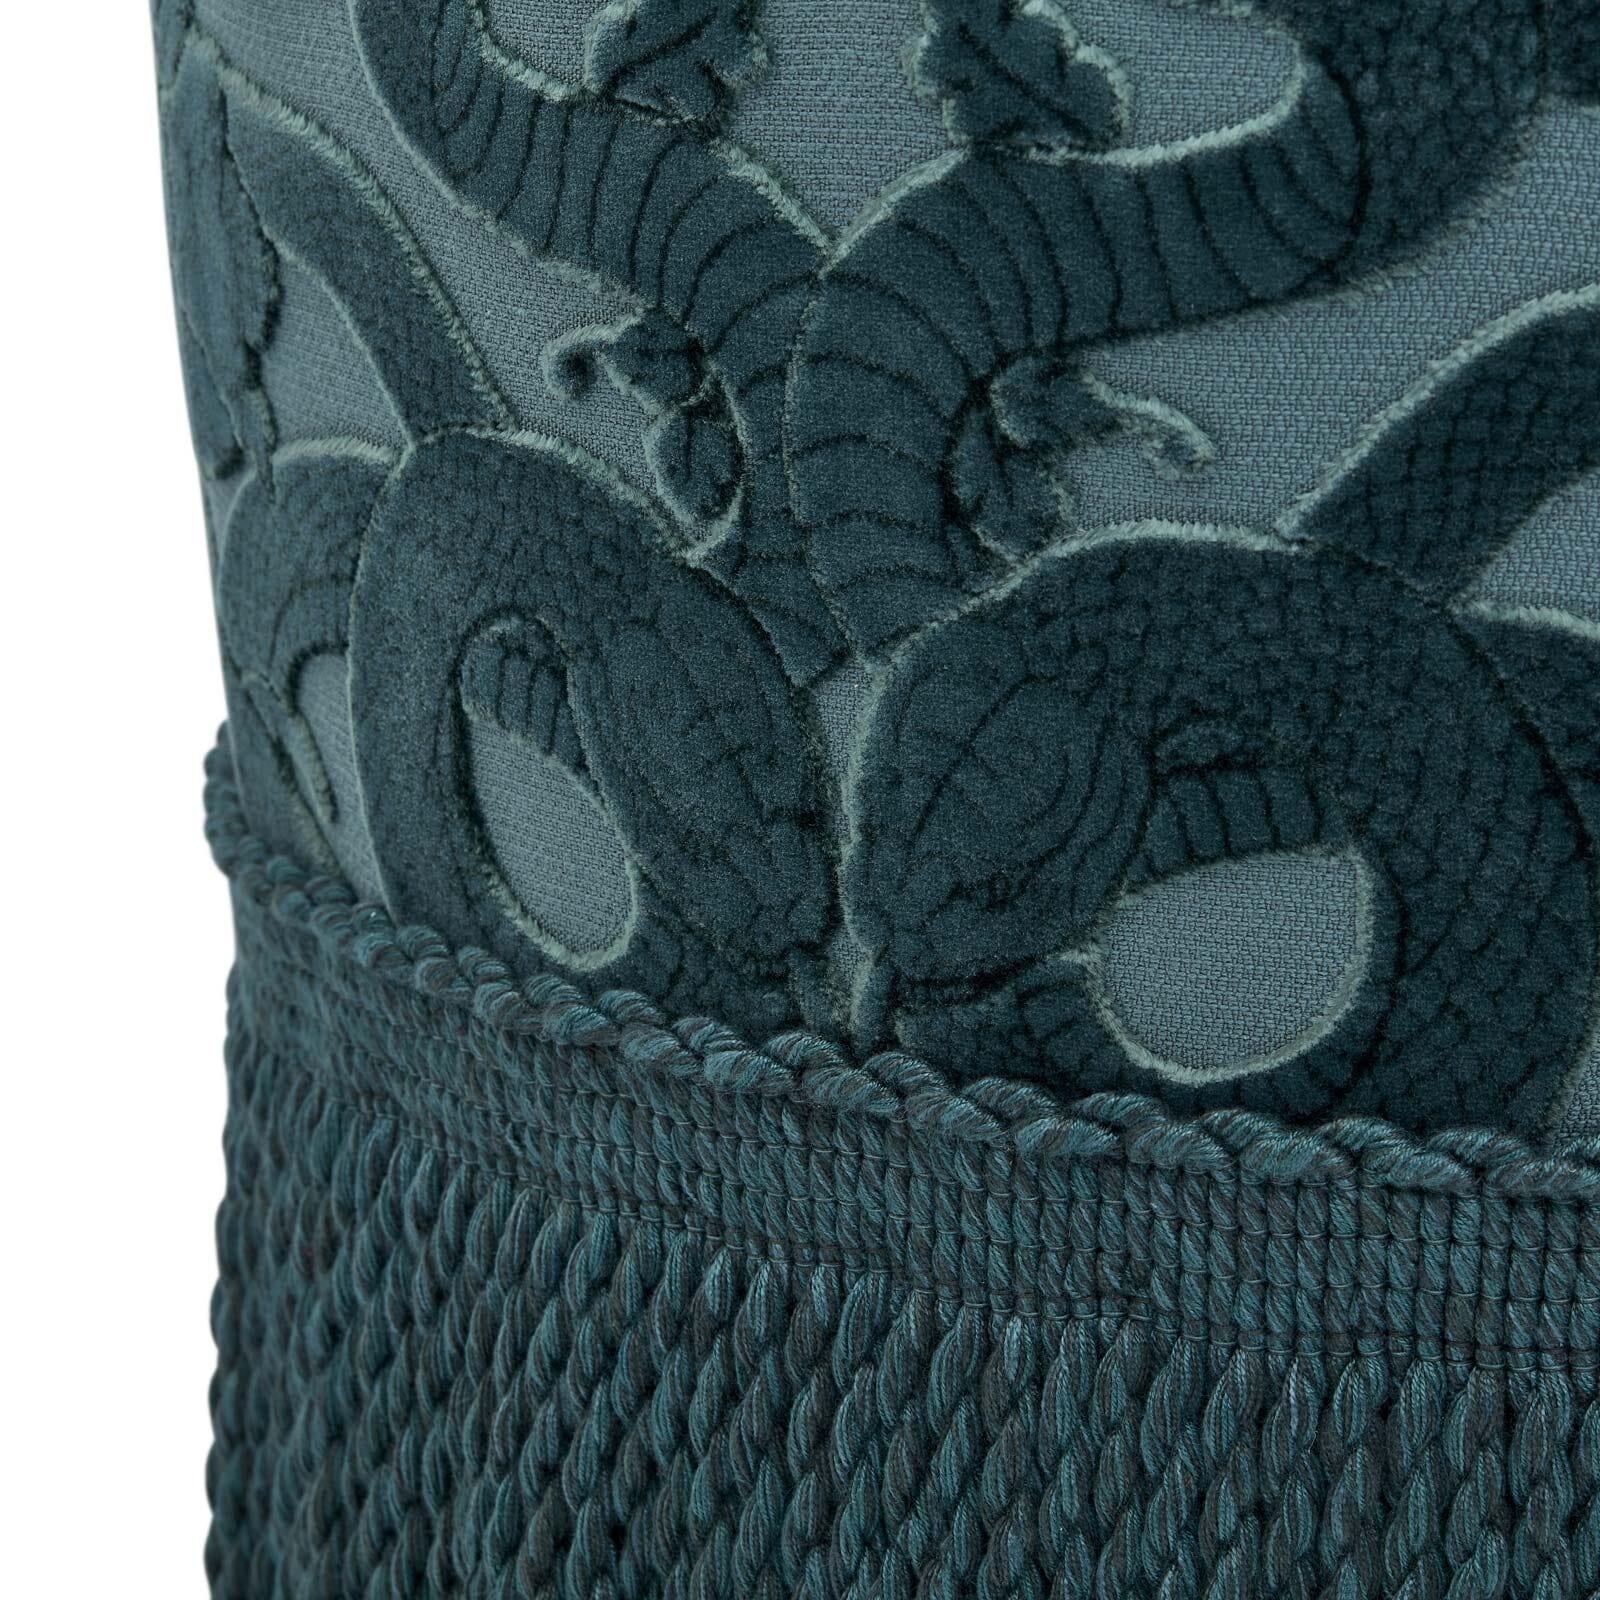 A trinity of House signatures intertwine on the ANACONDA Bottoman: our symbol of the snake, slithering across cut-velvet, the opulent shade of 'Petrol' blue and (of course) the design itself; a tongue-in-cheek take on the ottoman, crafted by the